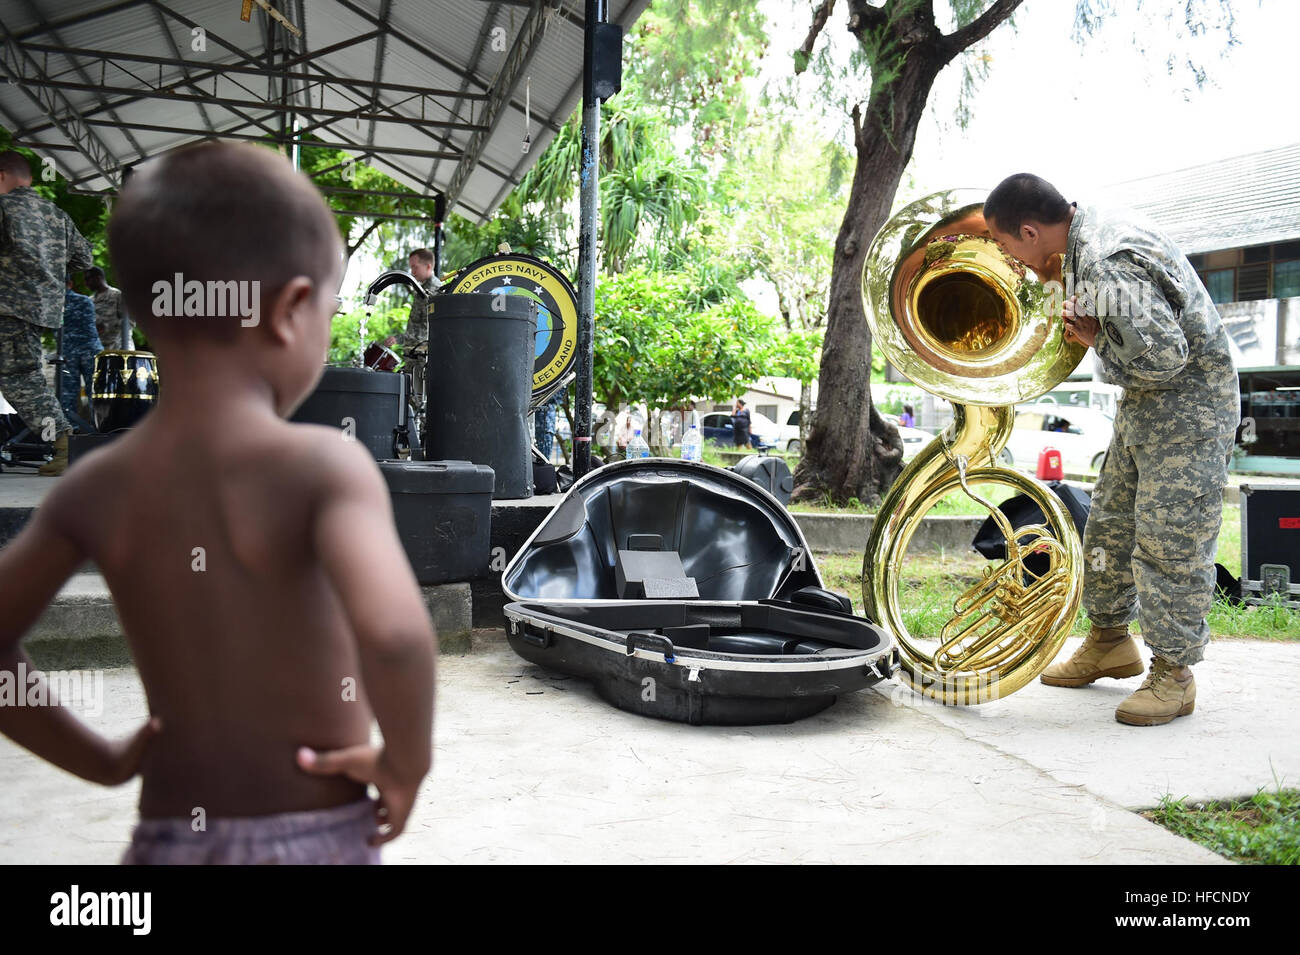 150604-N-HY254-022 TARAWA, Kiribati (June 4, 2015) An I-Kiribati boy watches a member of the 25th Infantry Division Band prepare his tuba for a concert in Bairiki Square during a Pacific Partnership visit to the Independent Republic of Kiribati. Joint High Speed Vessel USNS Millinocket (JHSV 3) is serving as the secondary platform for Pacific Partnership, led by an expeditionary command element from the Navy’s 30th Naval Construction Regiment (30 NCR) from Port Hueneme, Calif. Now in its 10th iteration, Pacific Partnership is the largest annual multilateral humanitarian assistance and disaster Stock Photo